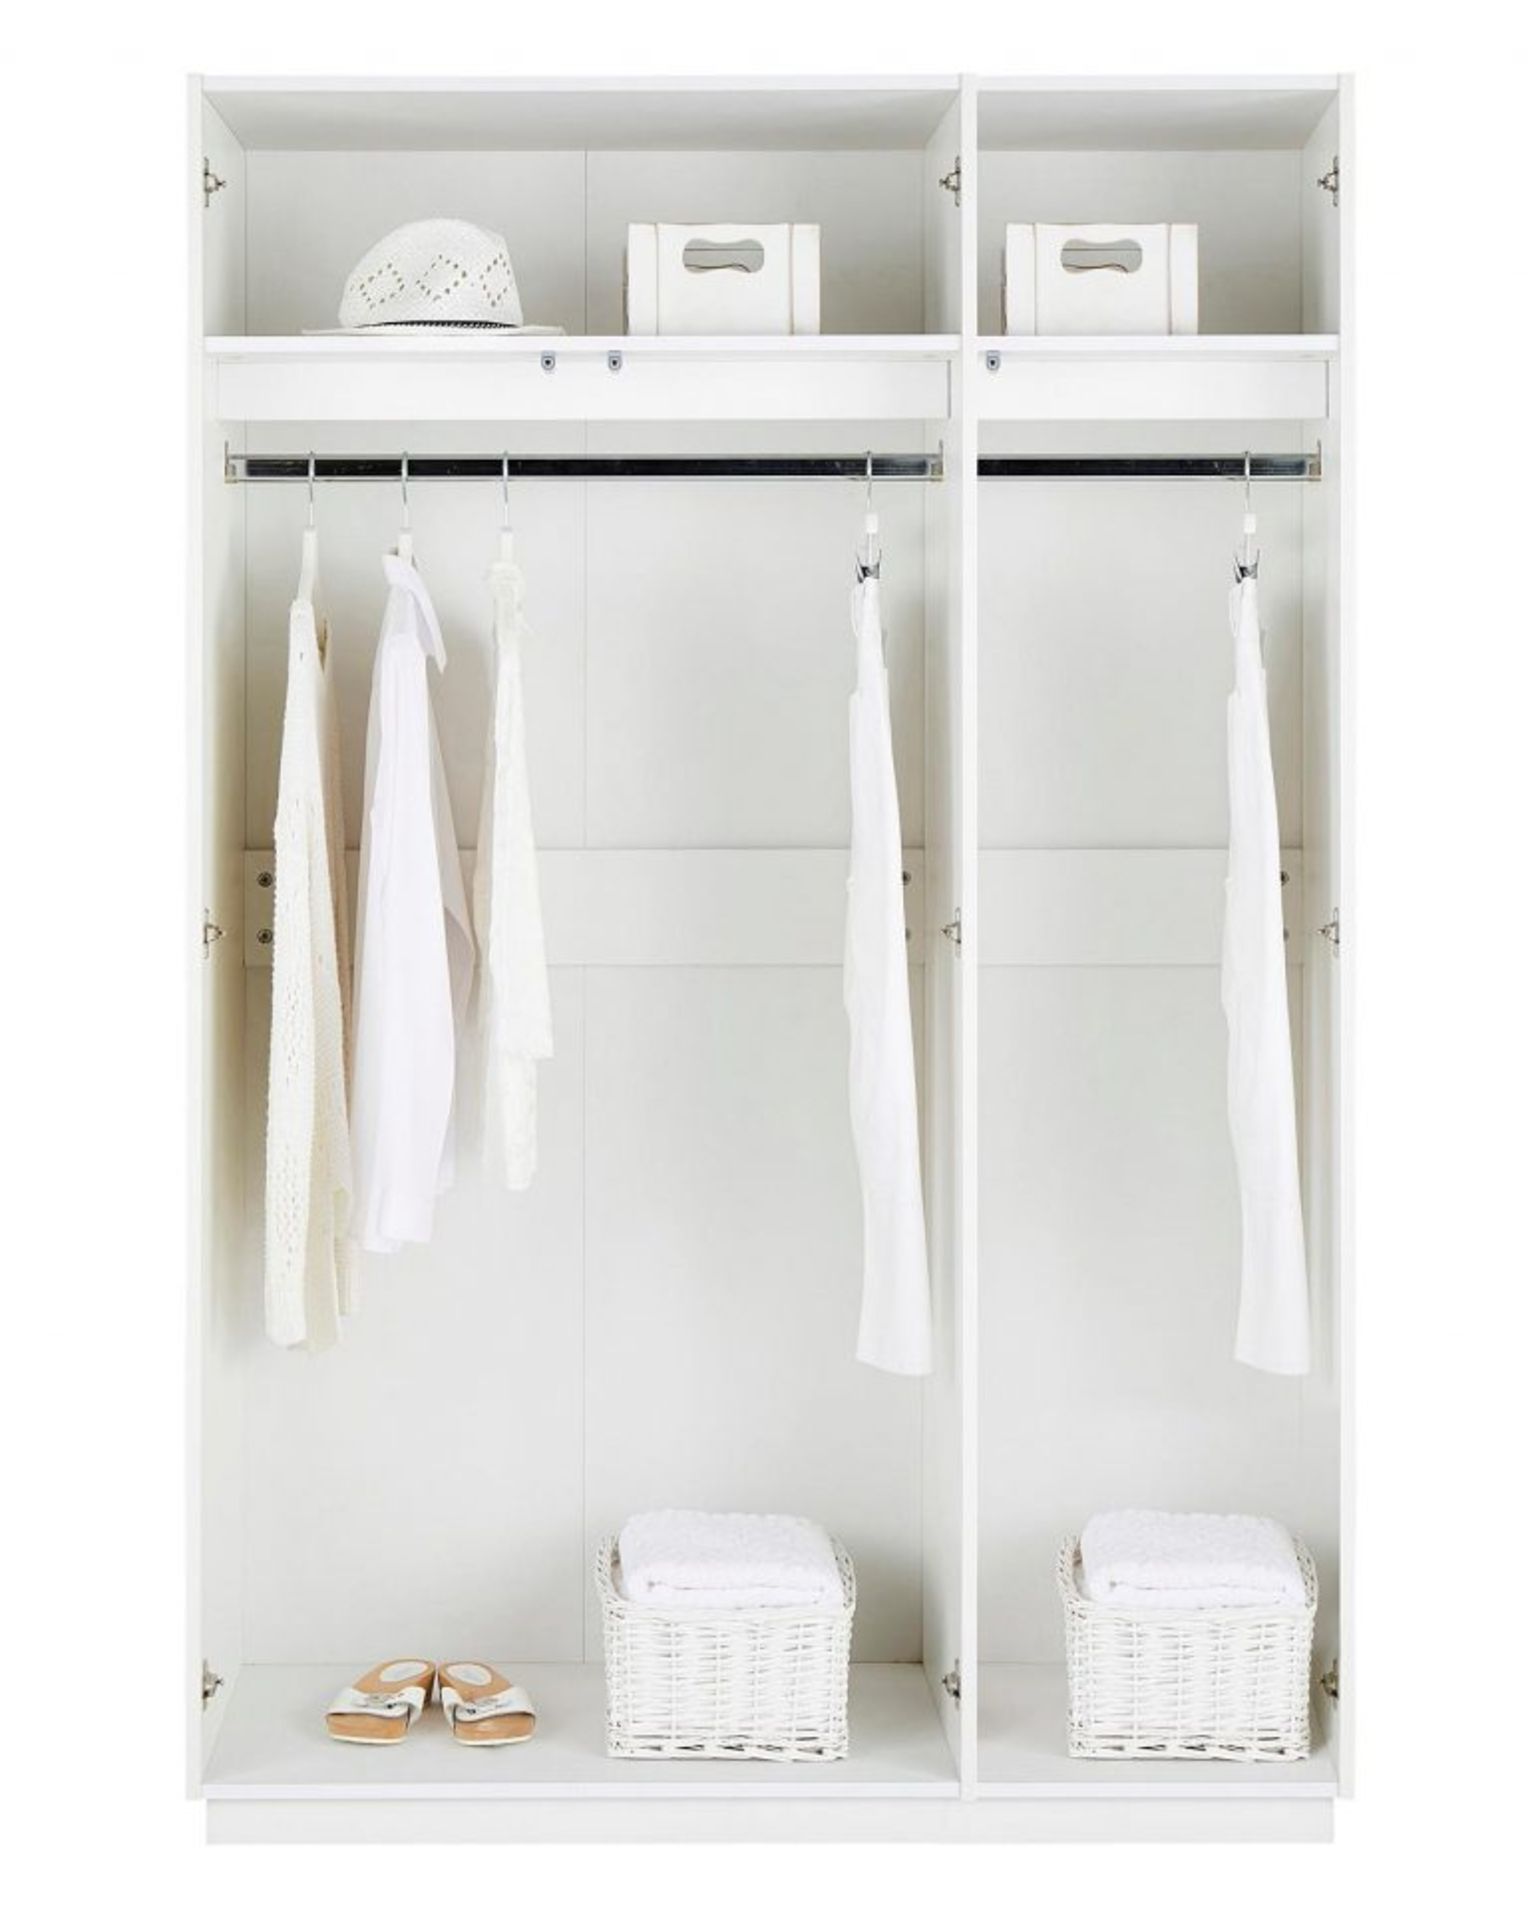 BRAND NEW ALLURE High Gloss 3 Door Wardrobe. WHITE. RRP £499 EACH. Part of At Home Collection, the - Image 2 of 2